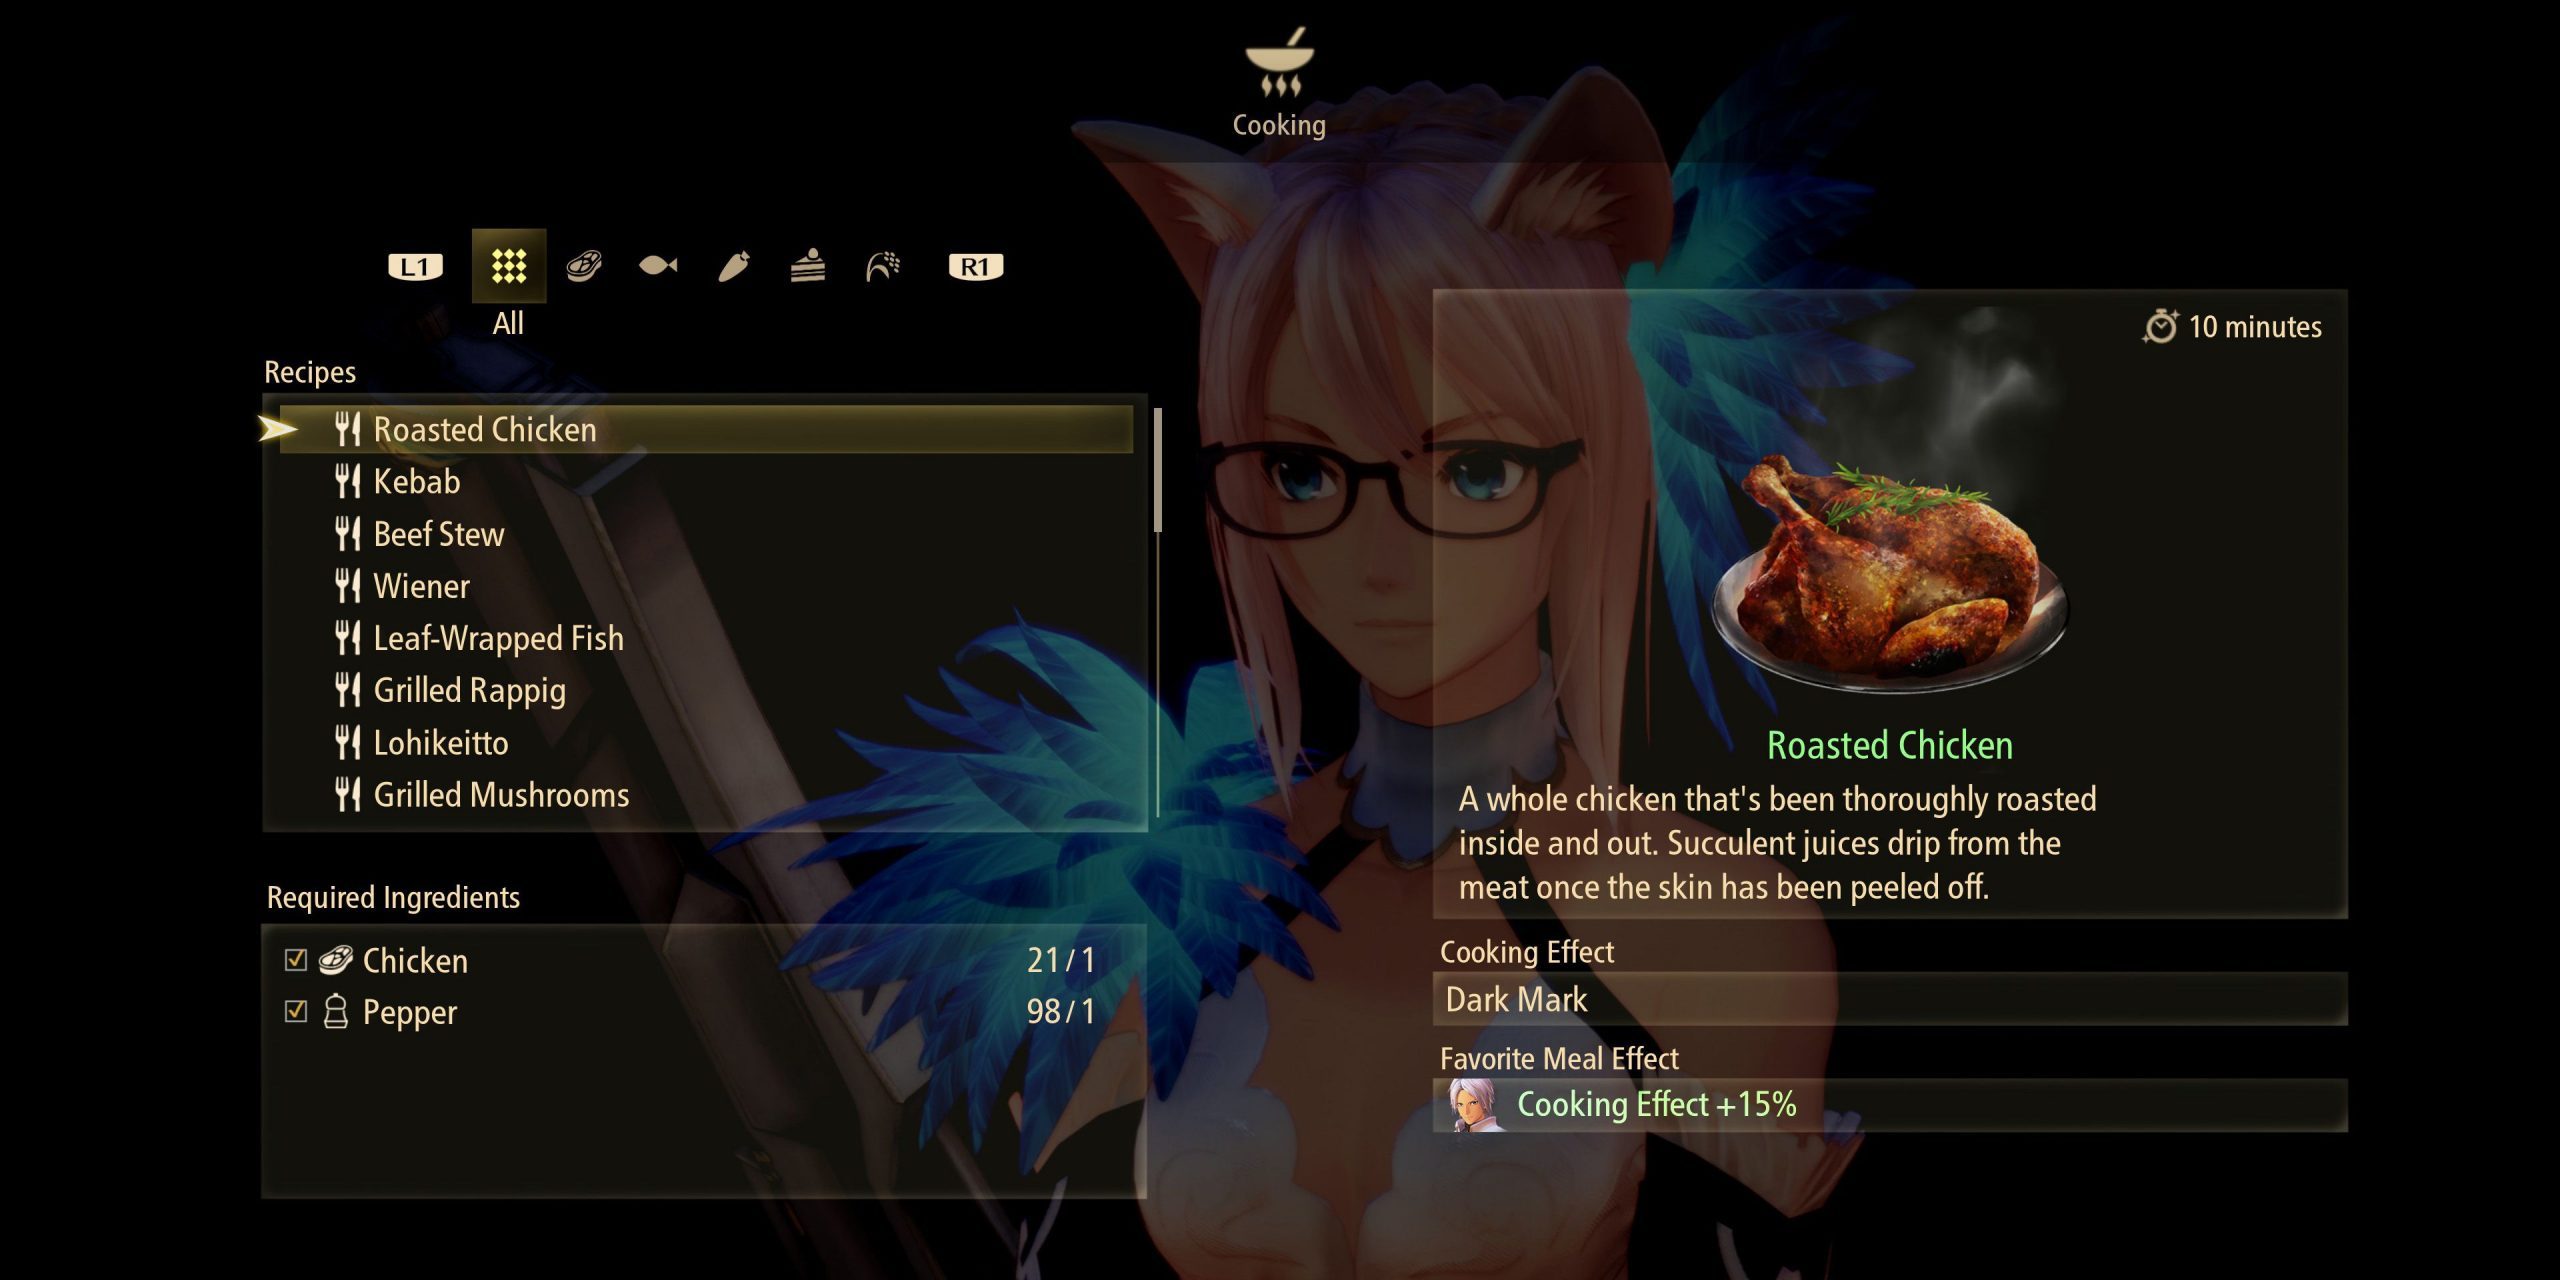 tales-of-arise-cooking-recipes-01-roasted-chicken-5914508